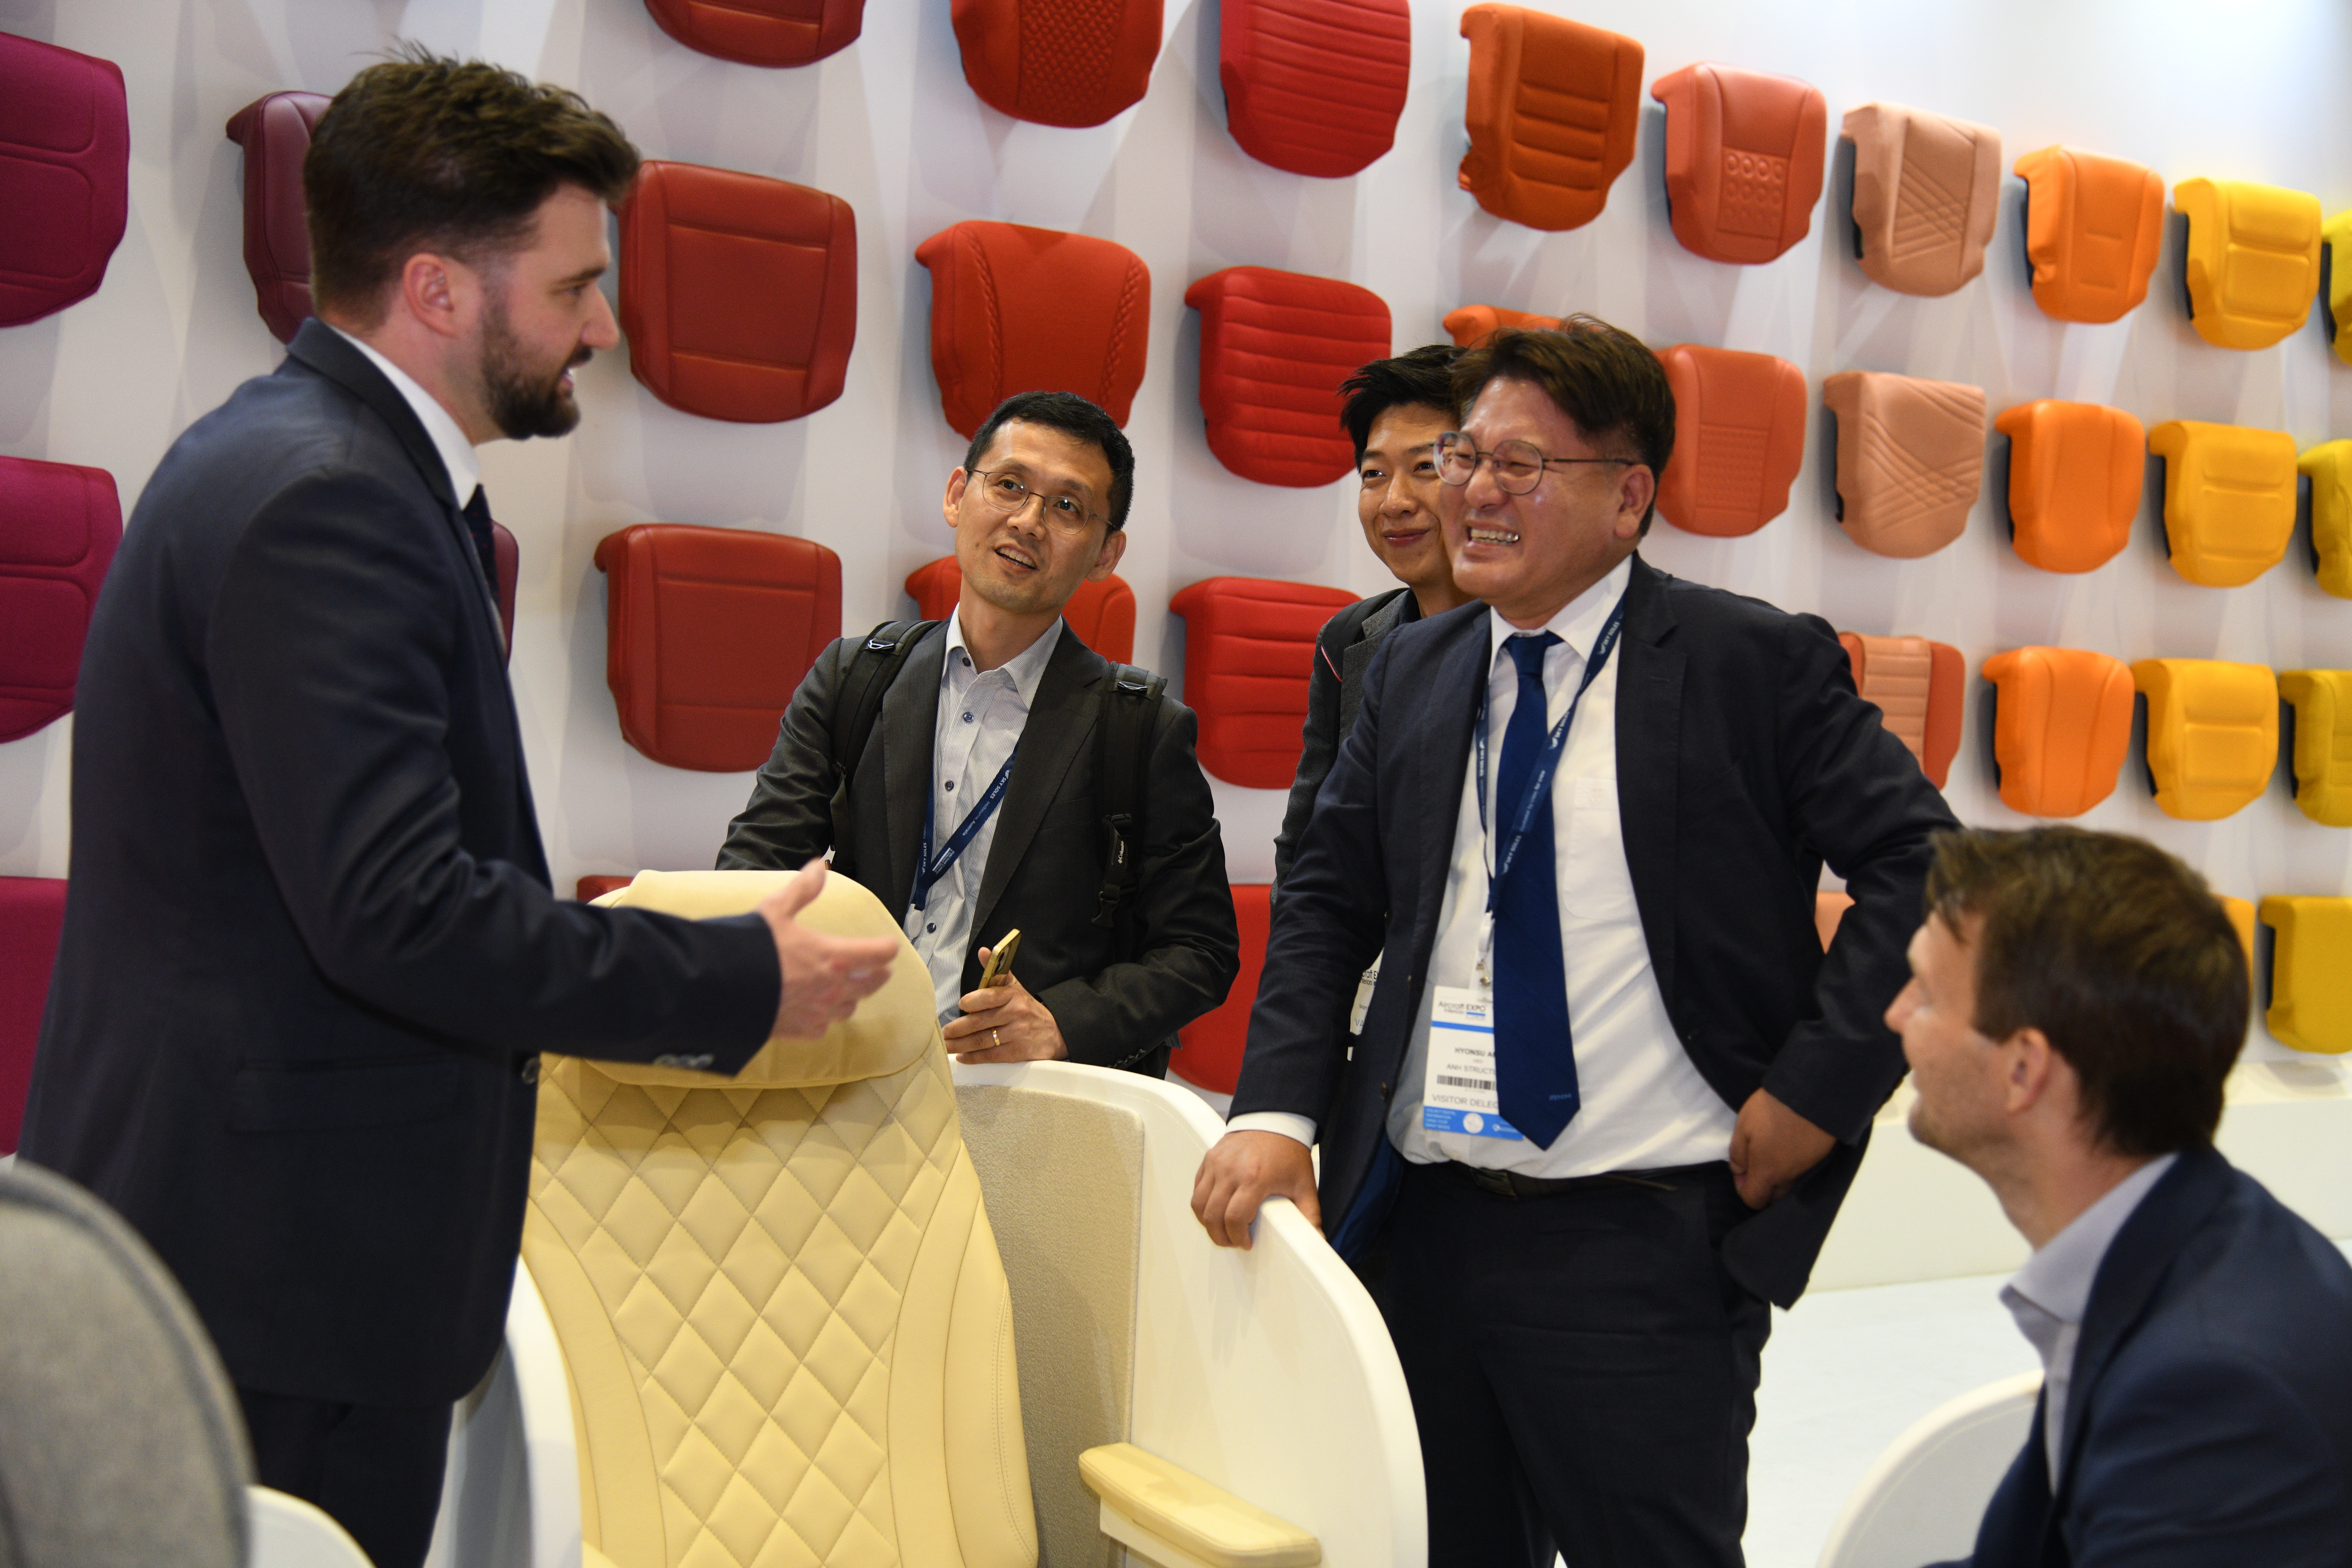 aix buyers and supplier seat demonstration